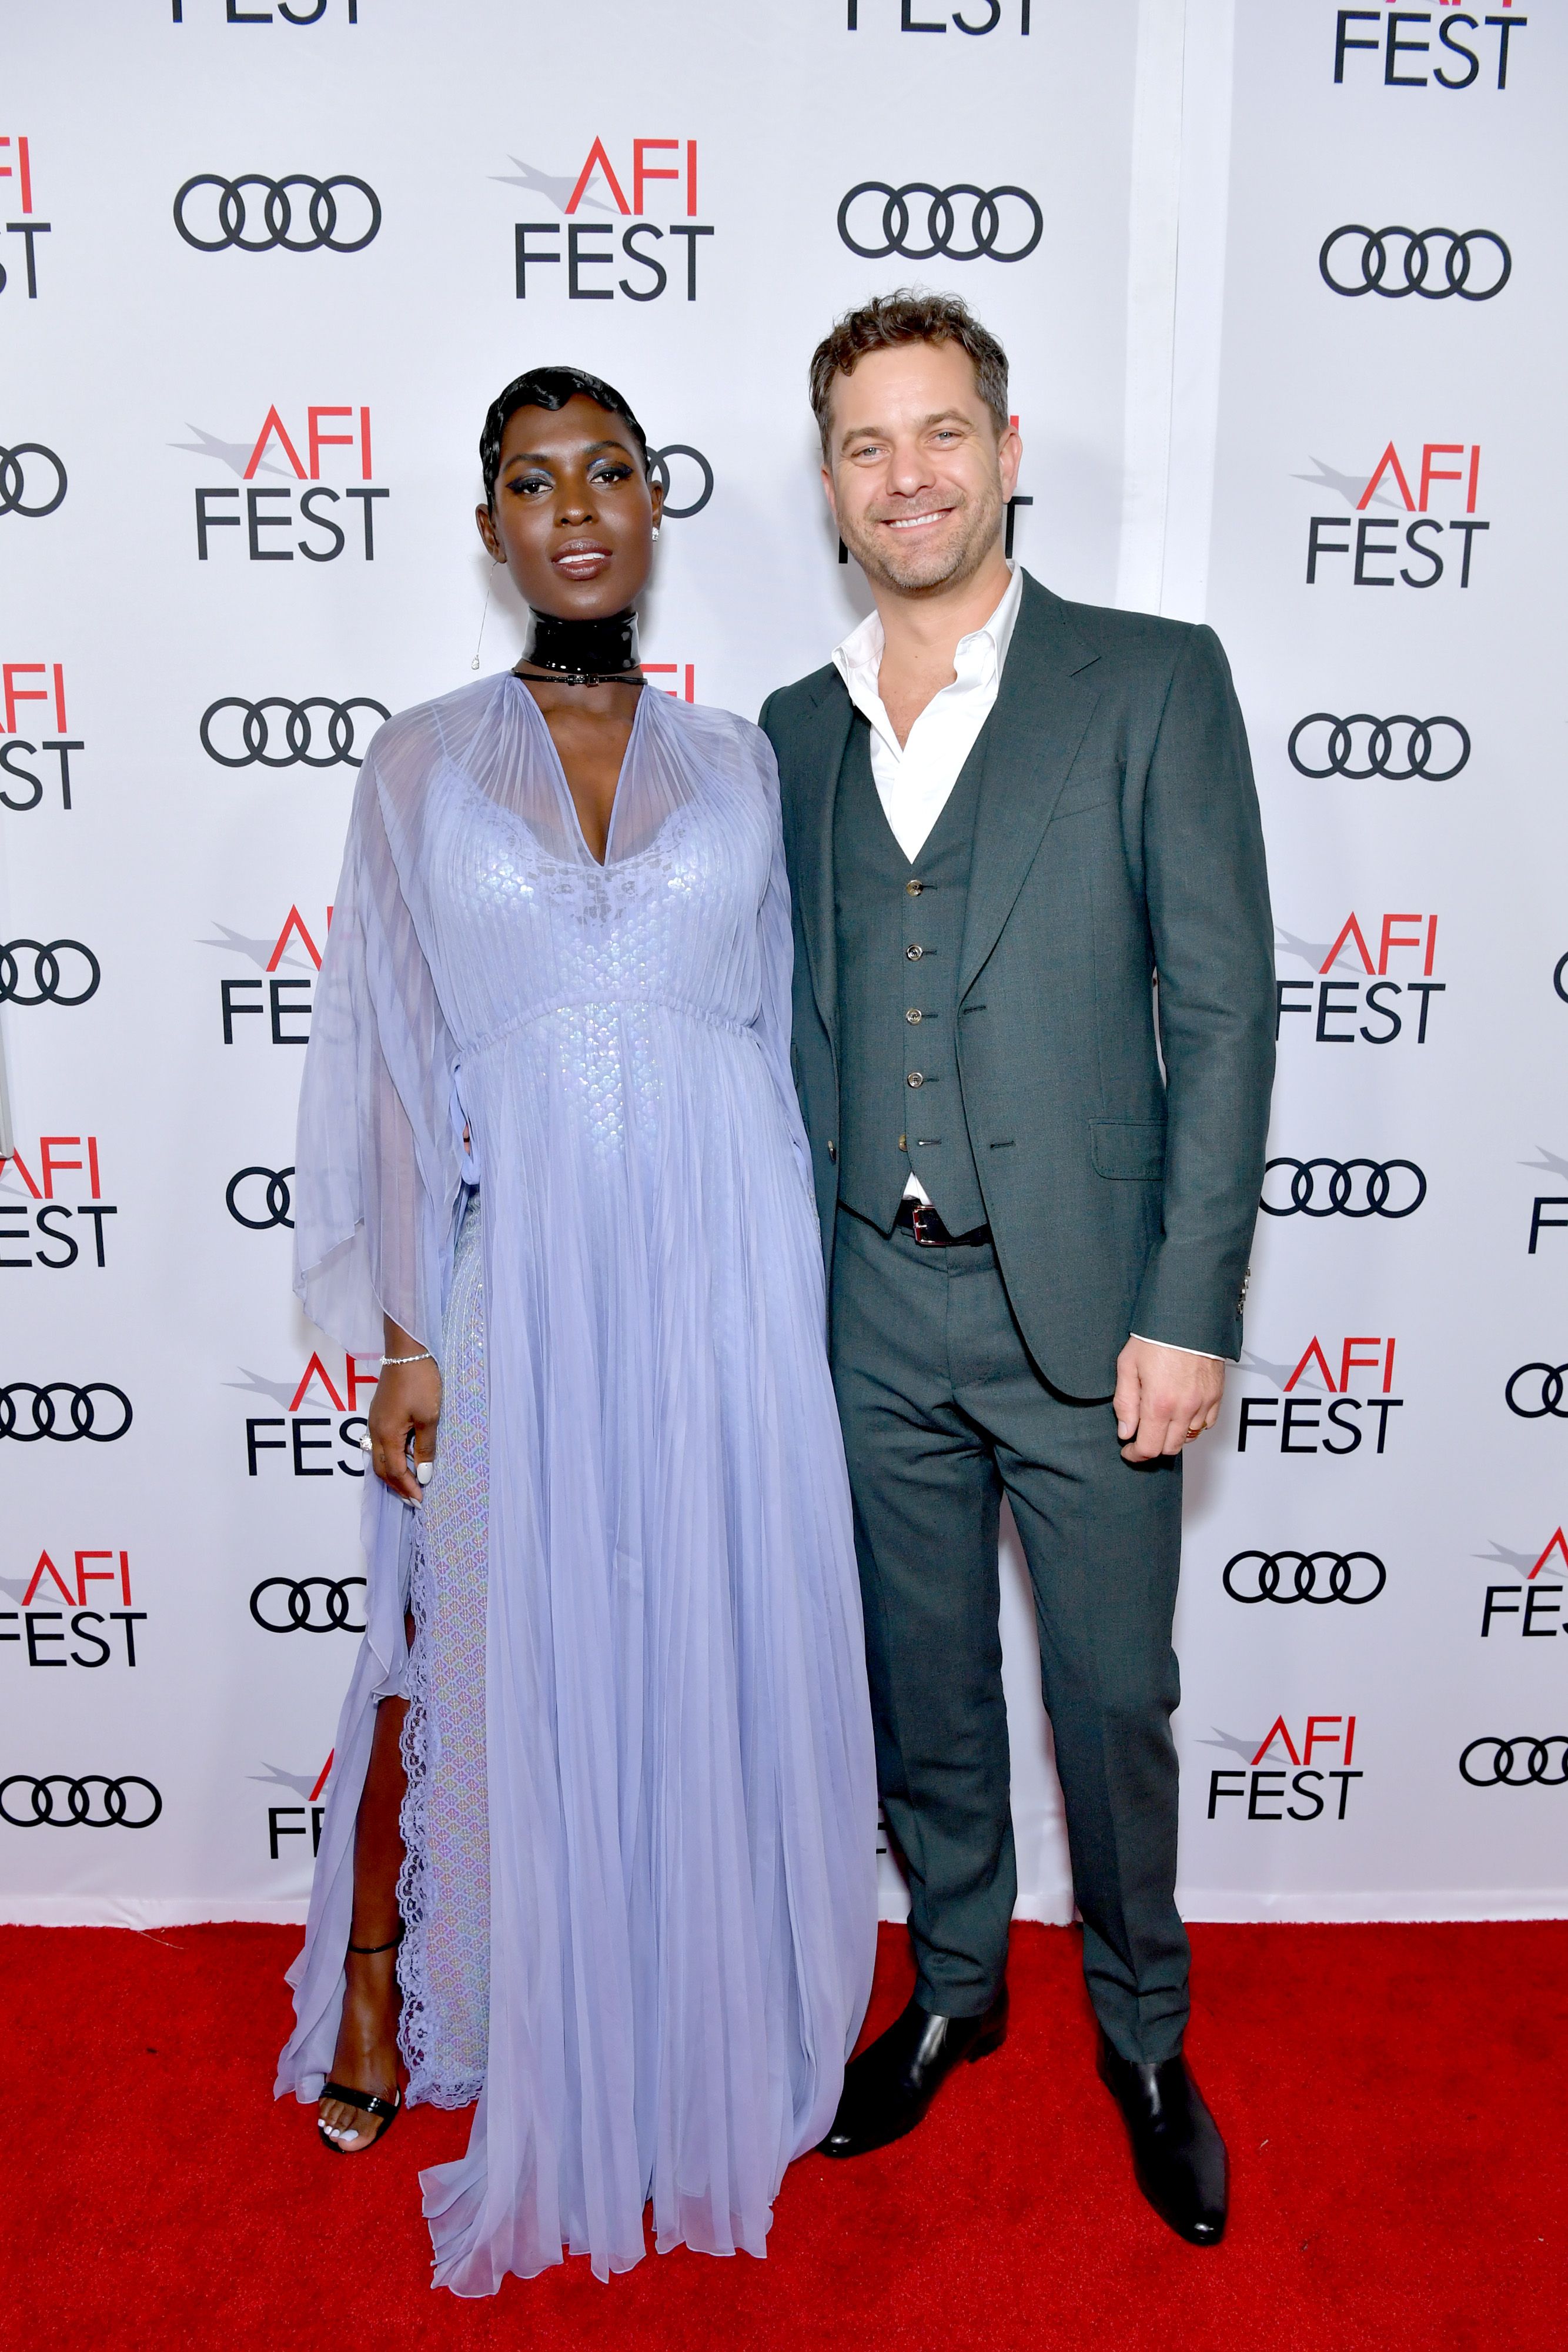 Jodie Turner-Smith and Joshua Jackson at the "Queen & Slim" Premiere at AFI FEST 2019 presented by Audi at the TCL Chinese Theatre on November 14, 2019 in Hollywood, California. | Source: Getty Images